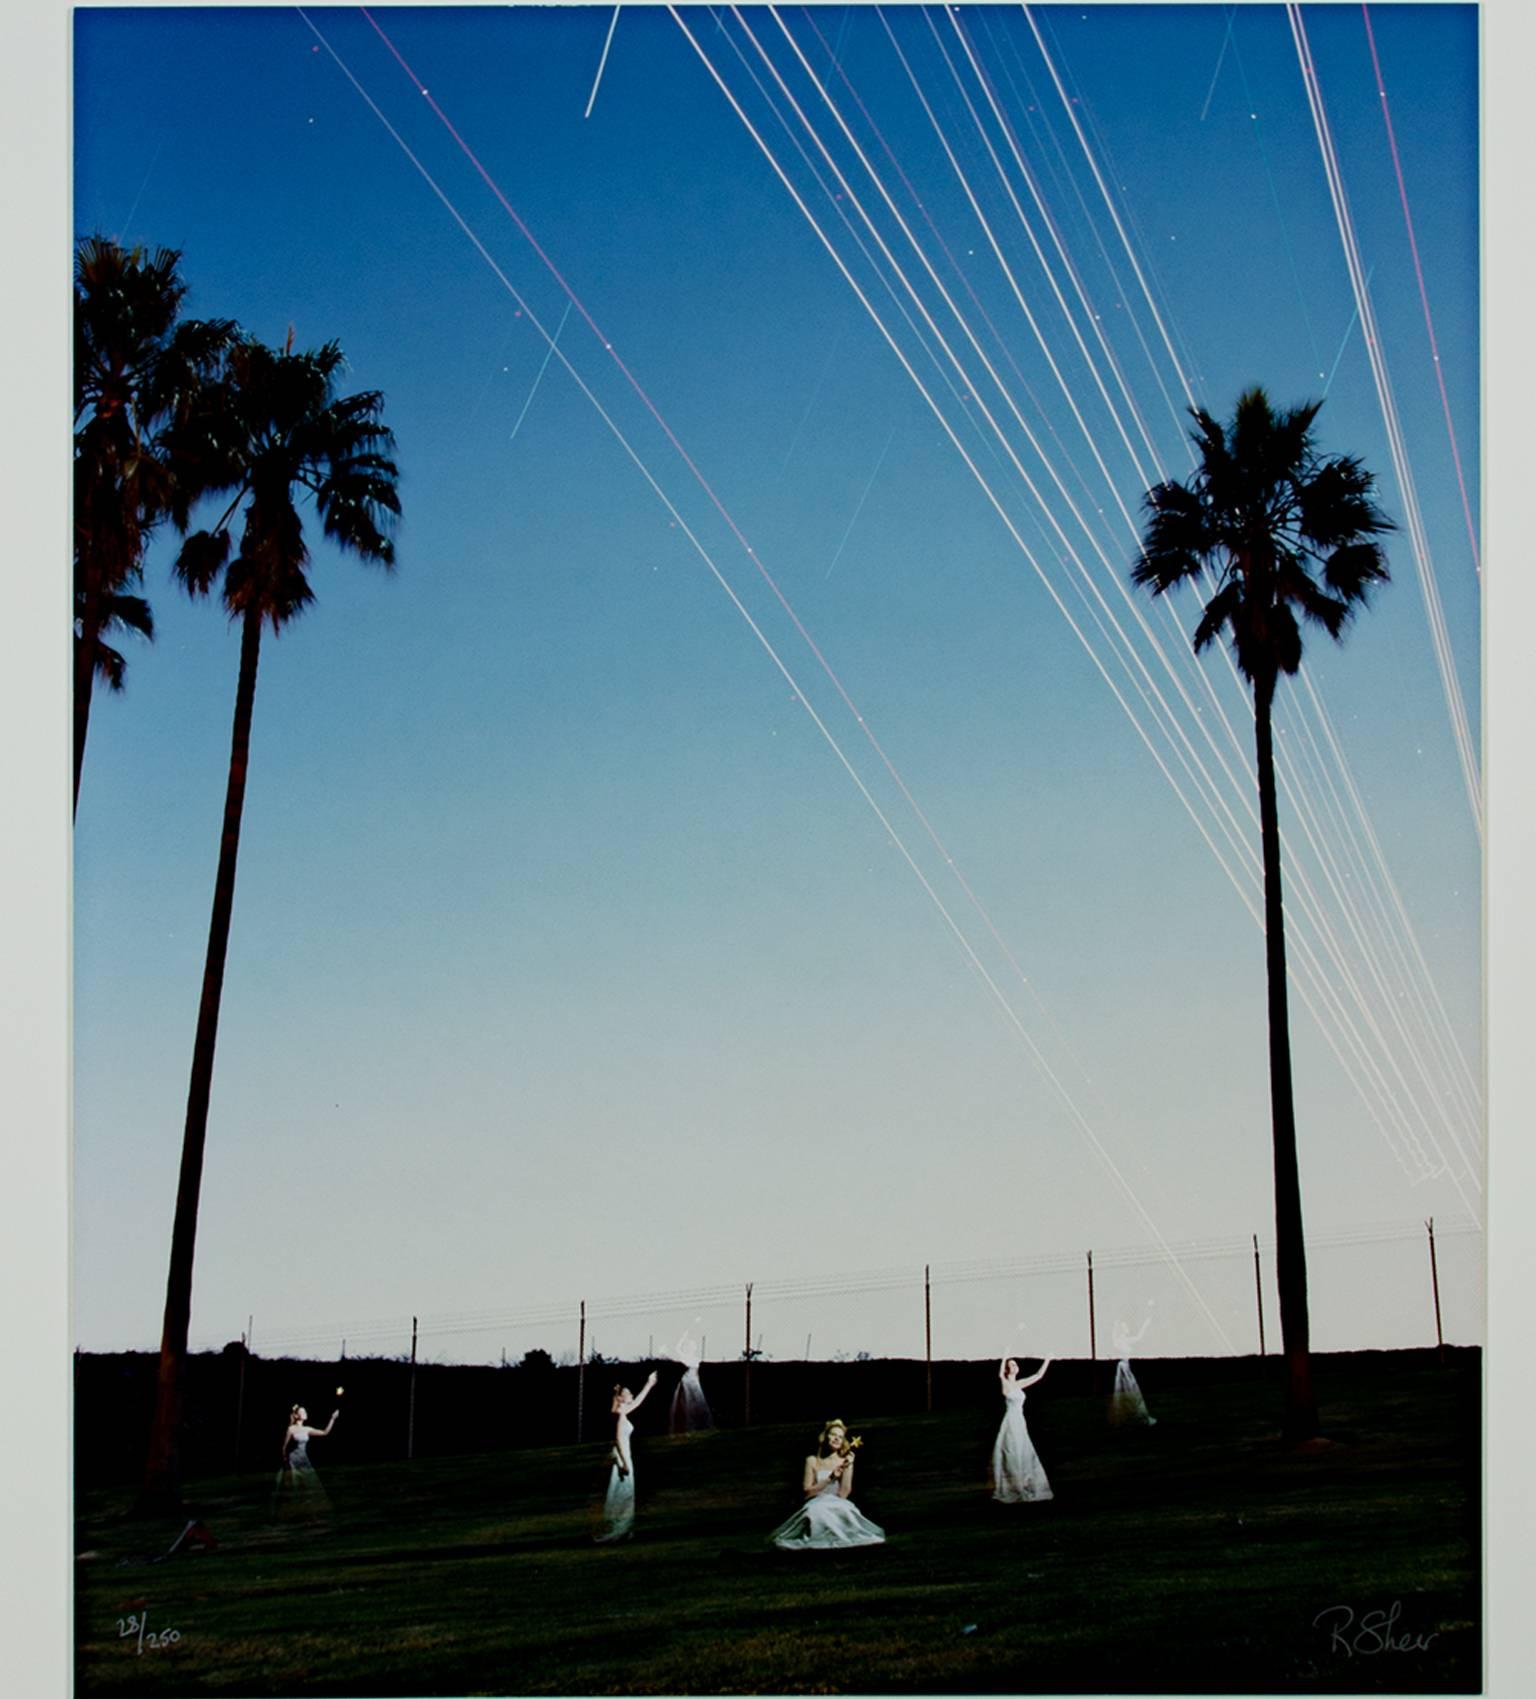 "The Fairy Princess Levitating Planes Into the Night Sky at LAX" is a long-exposure photograph by Robert Kawika Sheer. The artist signed this piece in the lower right and editioned it in the lower left. Edition: 28/250. It depicts multiple views of